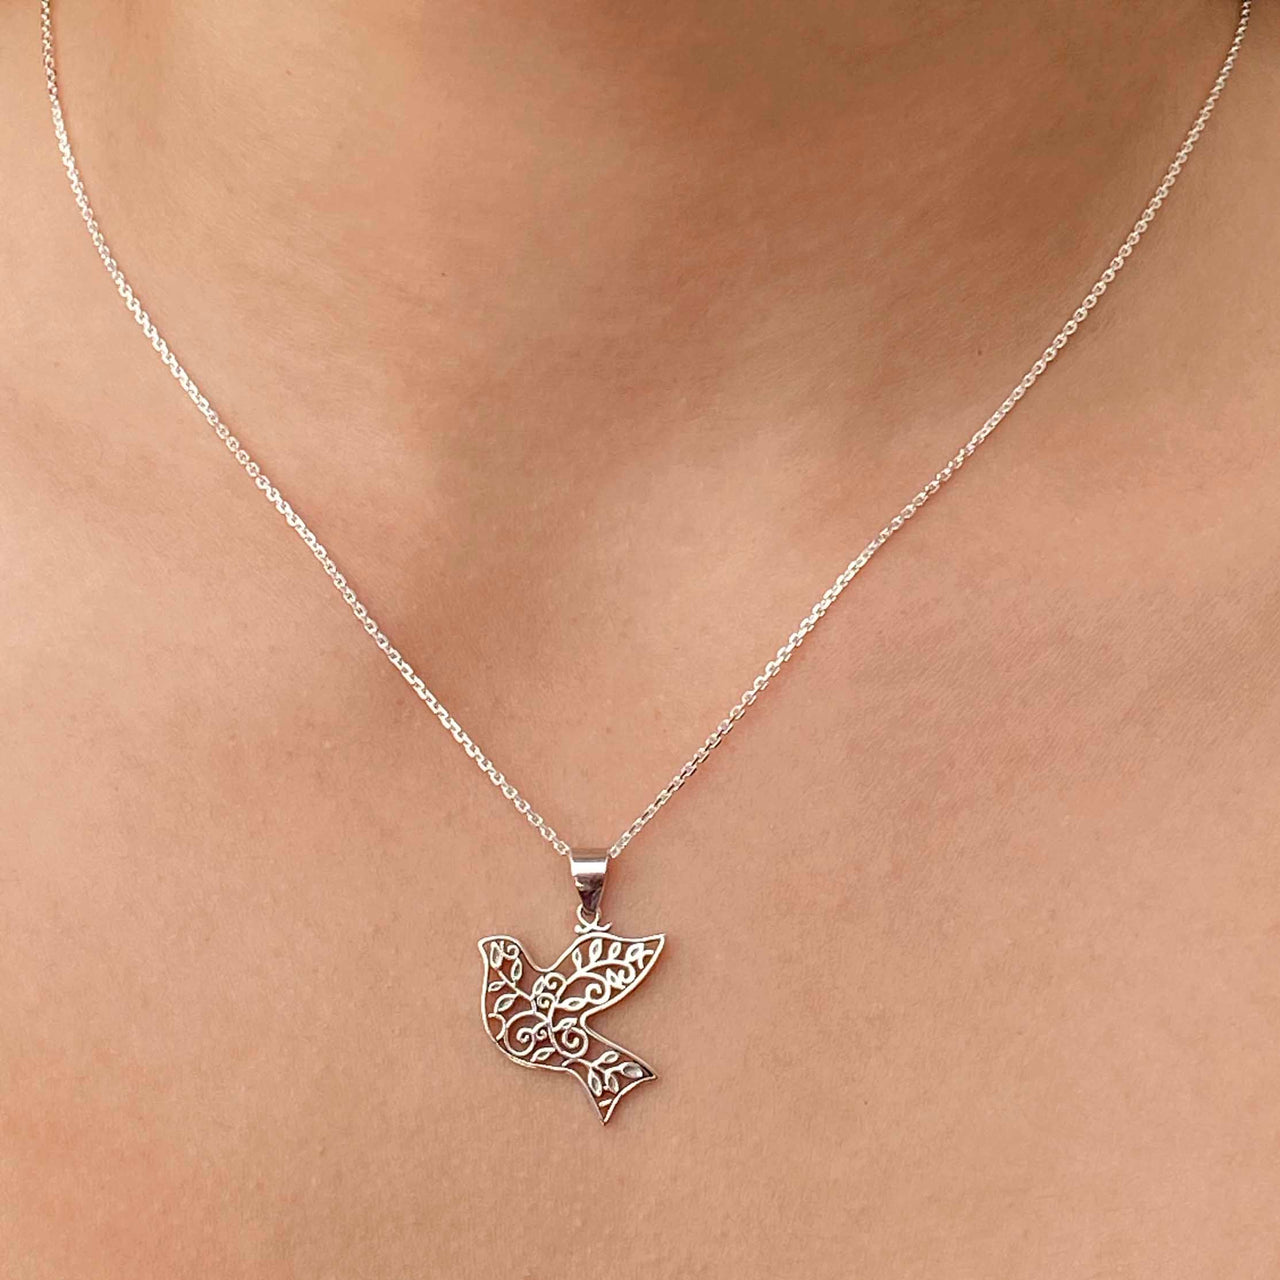 Dove Filigree Necklace Sterling Silver Jewelry